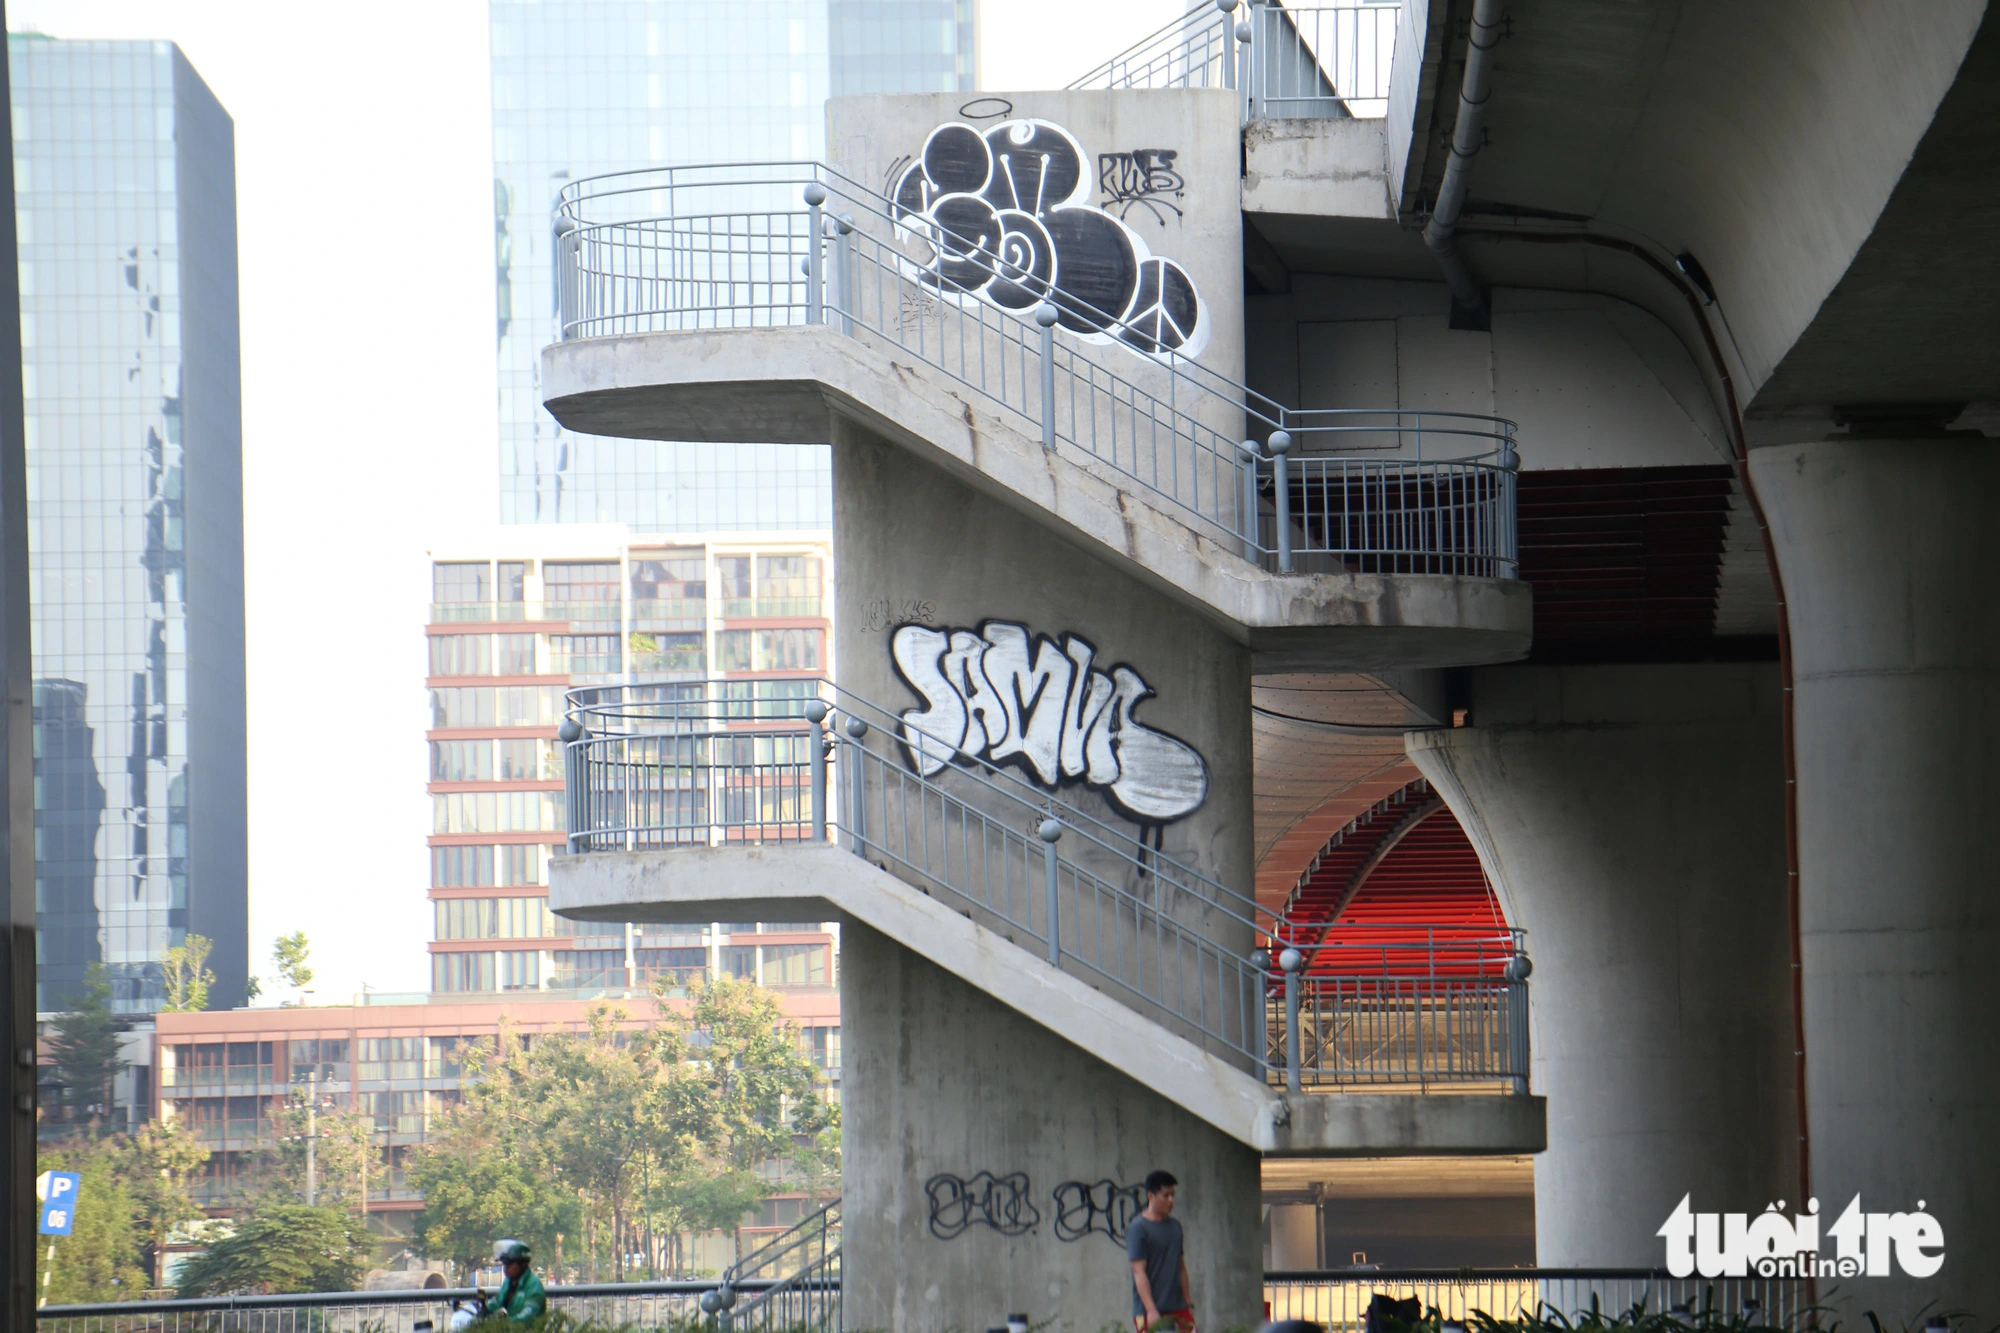 A lower part and a pedestrian stairway of the Ba Son Bridge, also known as Thu Thiem 2 Bridge, in District 1 is seen covered with both old and new graffiti. Photo: Minh Hoa / Tuoi Tre